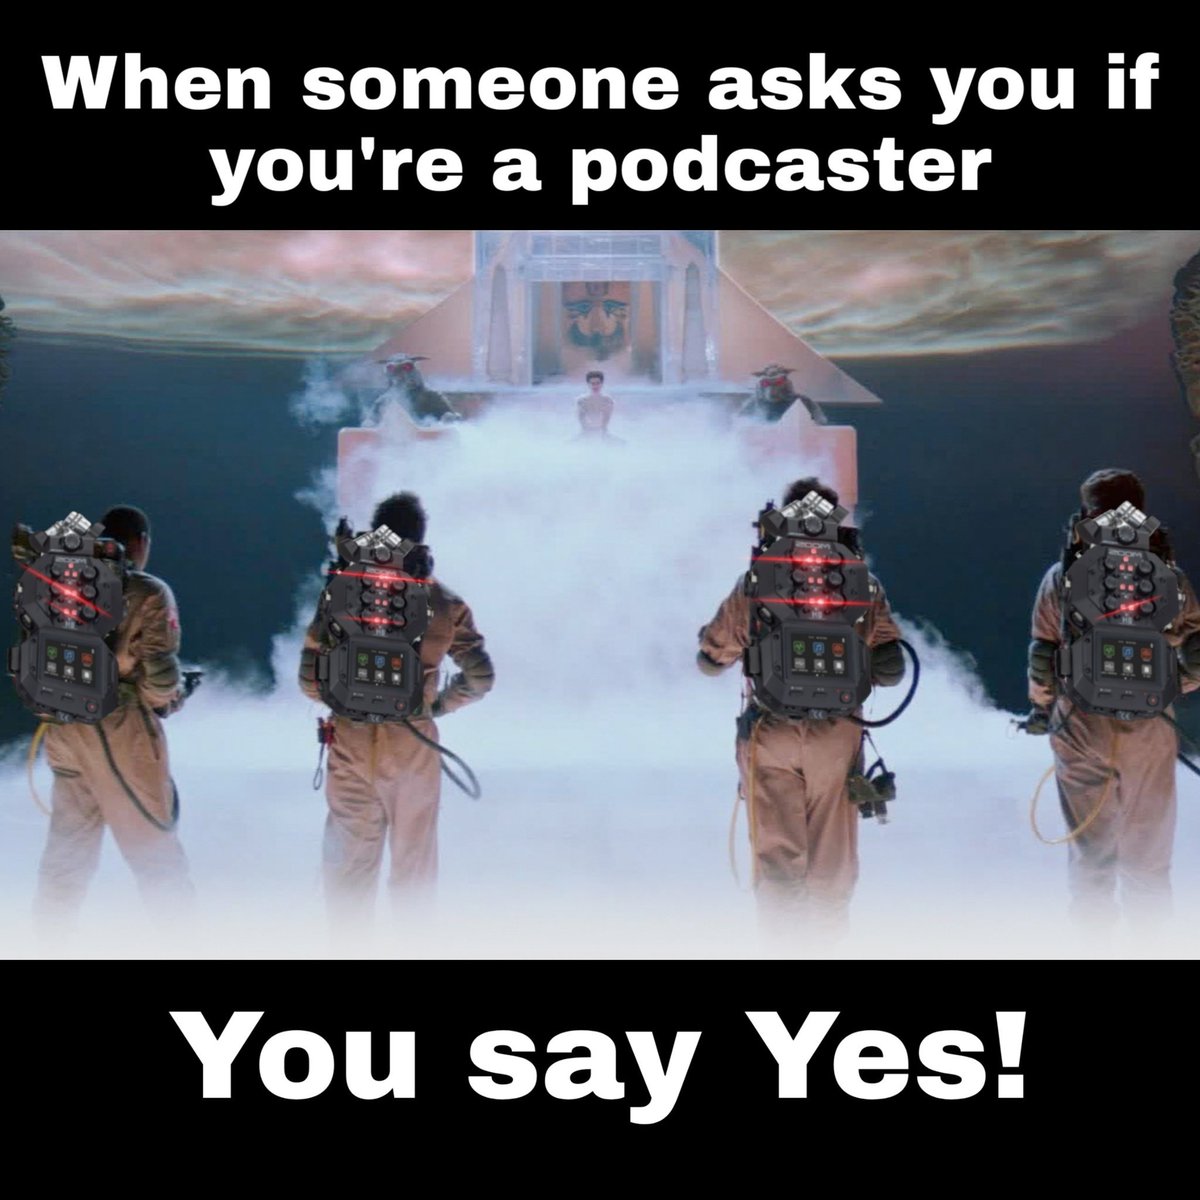 Me and my #podcasting friends when we get the new #ZoomH8! Can't wait!!